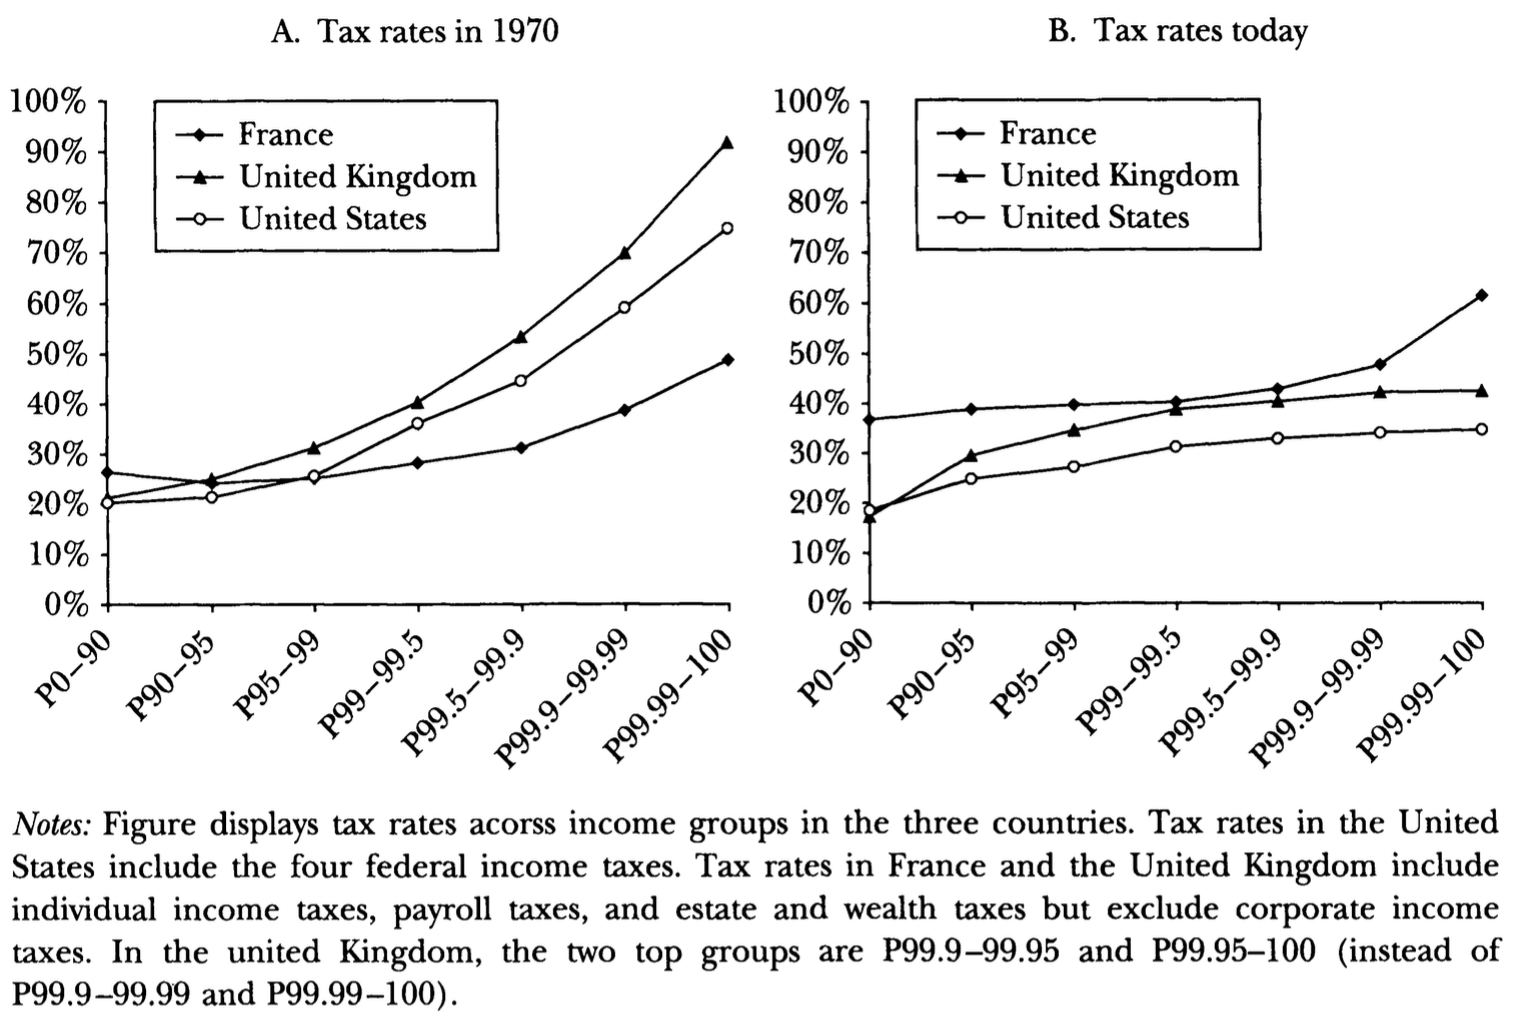 Average tax rates by income groups in France, the United Kingdom, and the United States, 1970 and 2005 – Figure 4 in Piketty and Saez (2007)<a class="ref" href=_.html#note-16"><sup>16</sup></a>